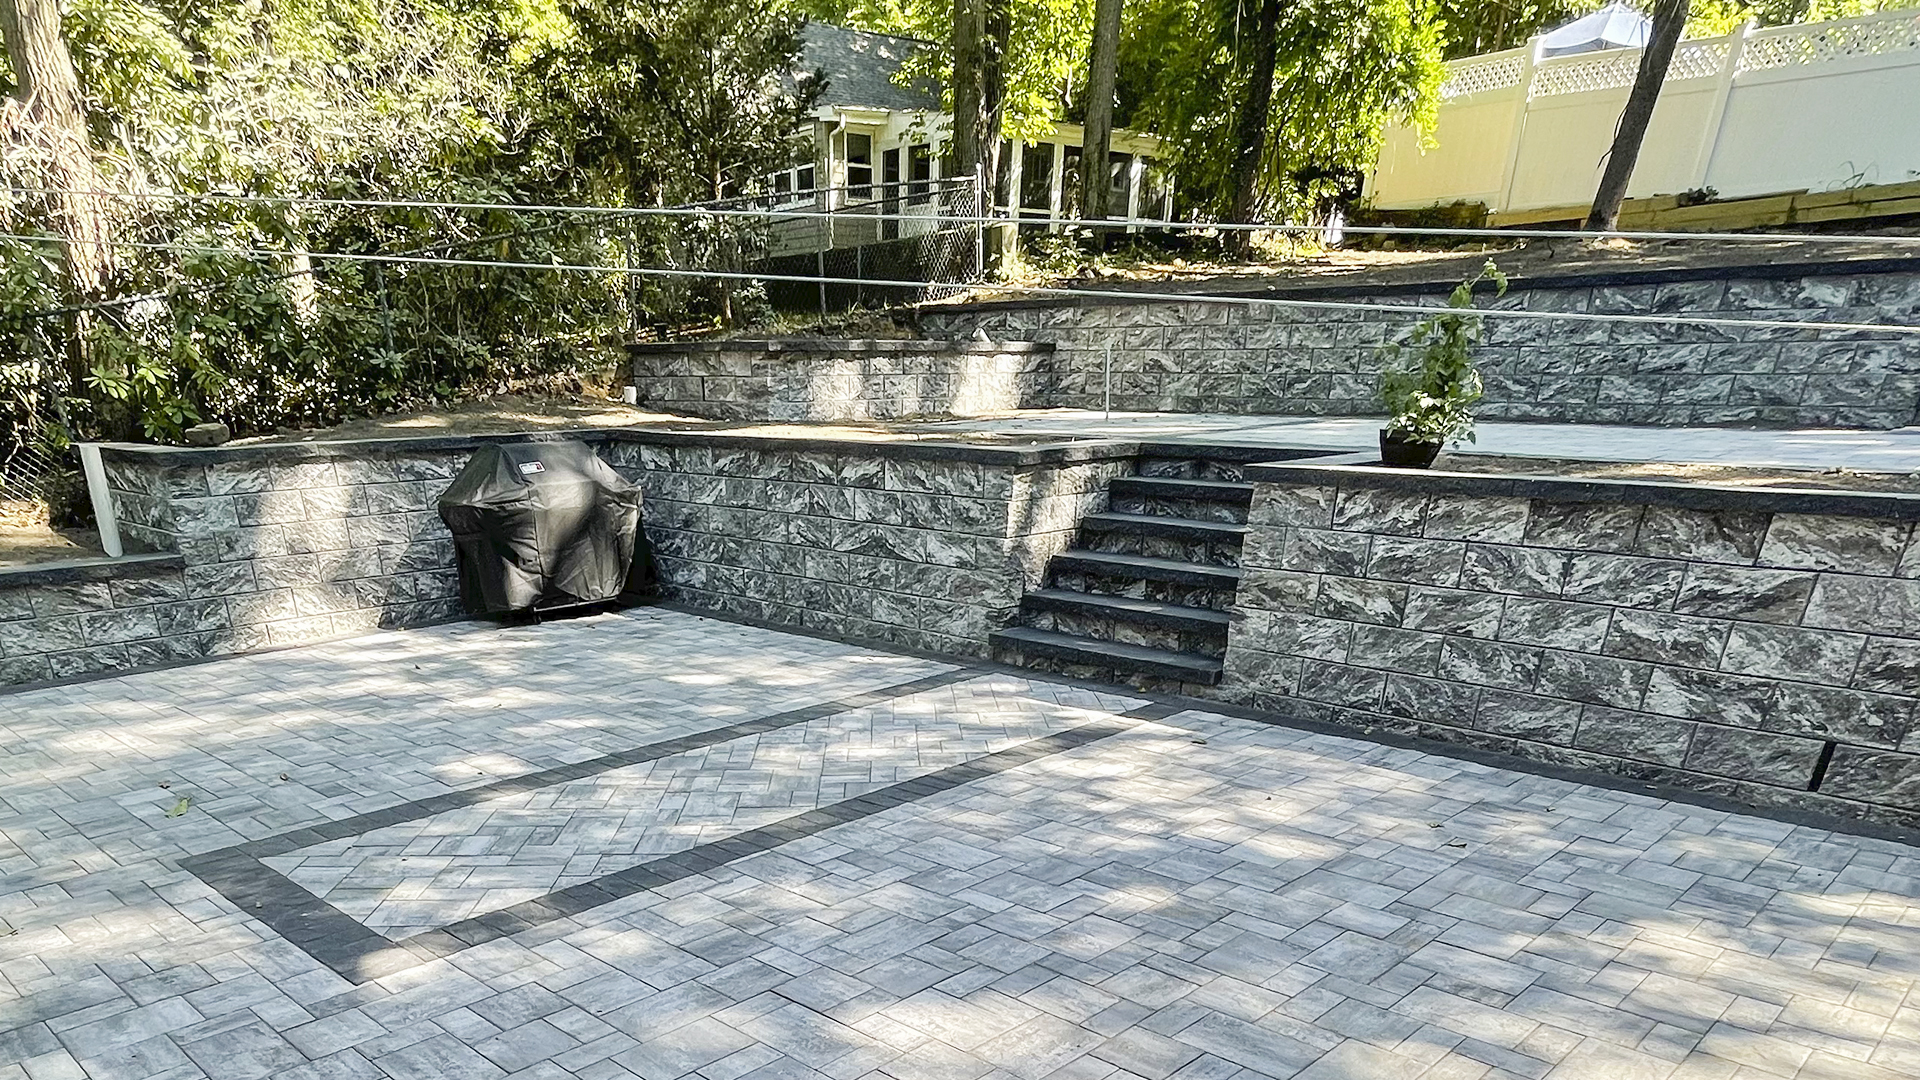 Cost-efficient natural stone retaining wall next to a patio